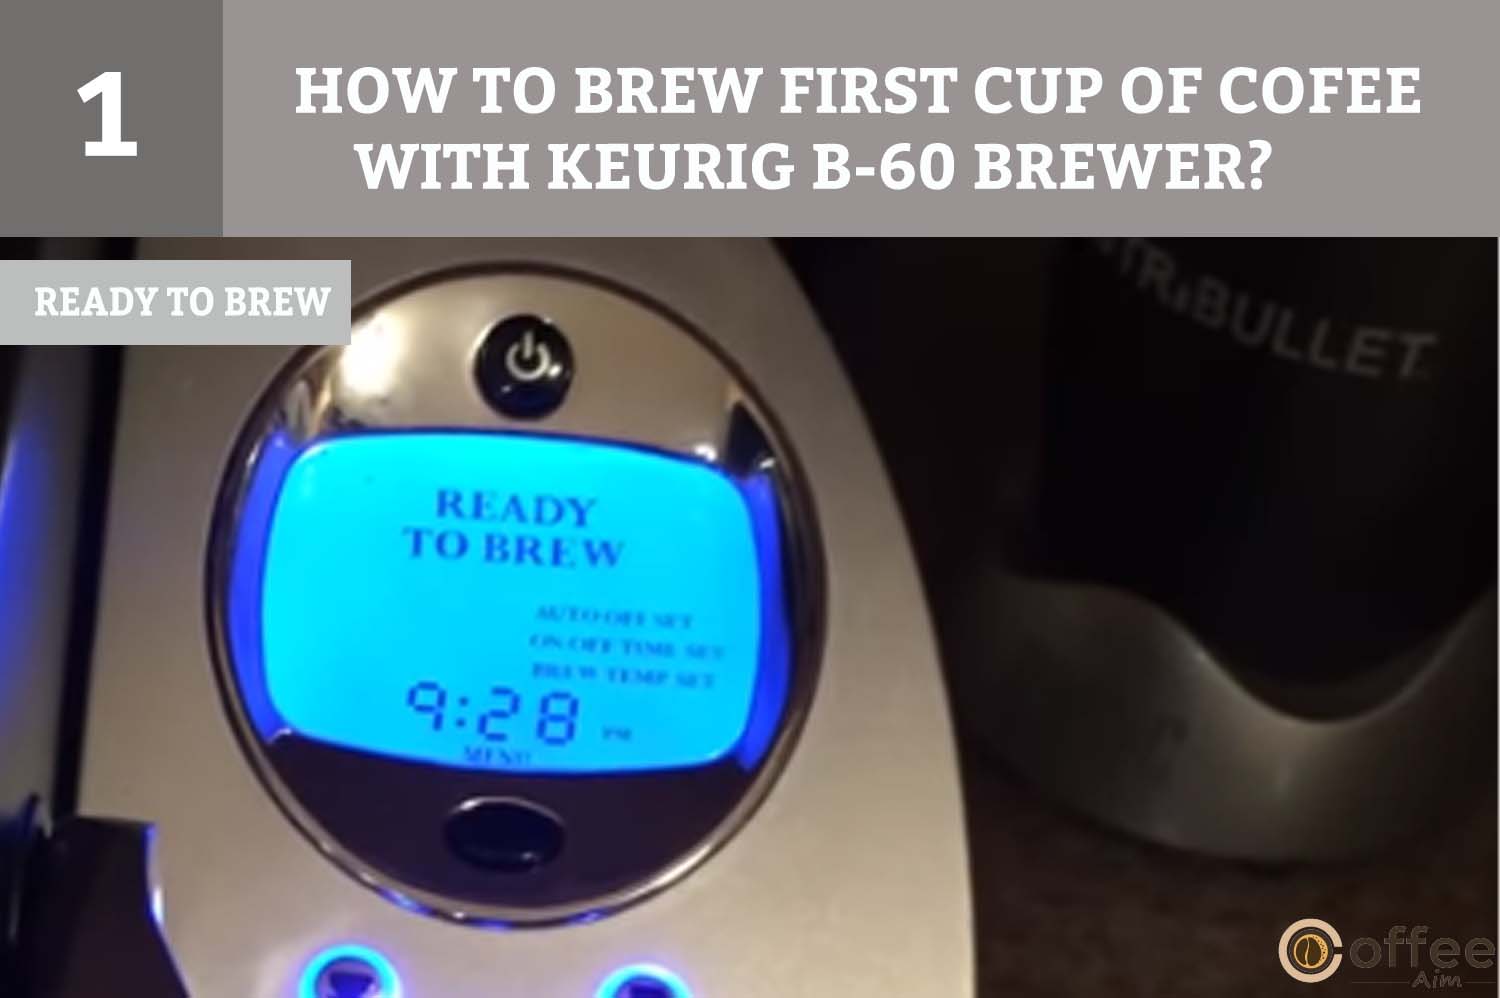 When your Keurig B-60 is ready to brew, the LCD control center will display "READY TO BREW," indicating that you can start making your coffee.